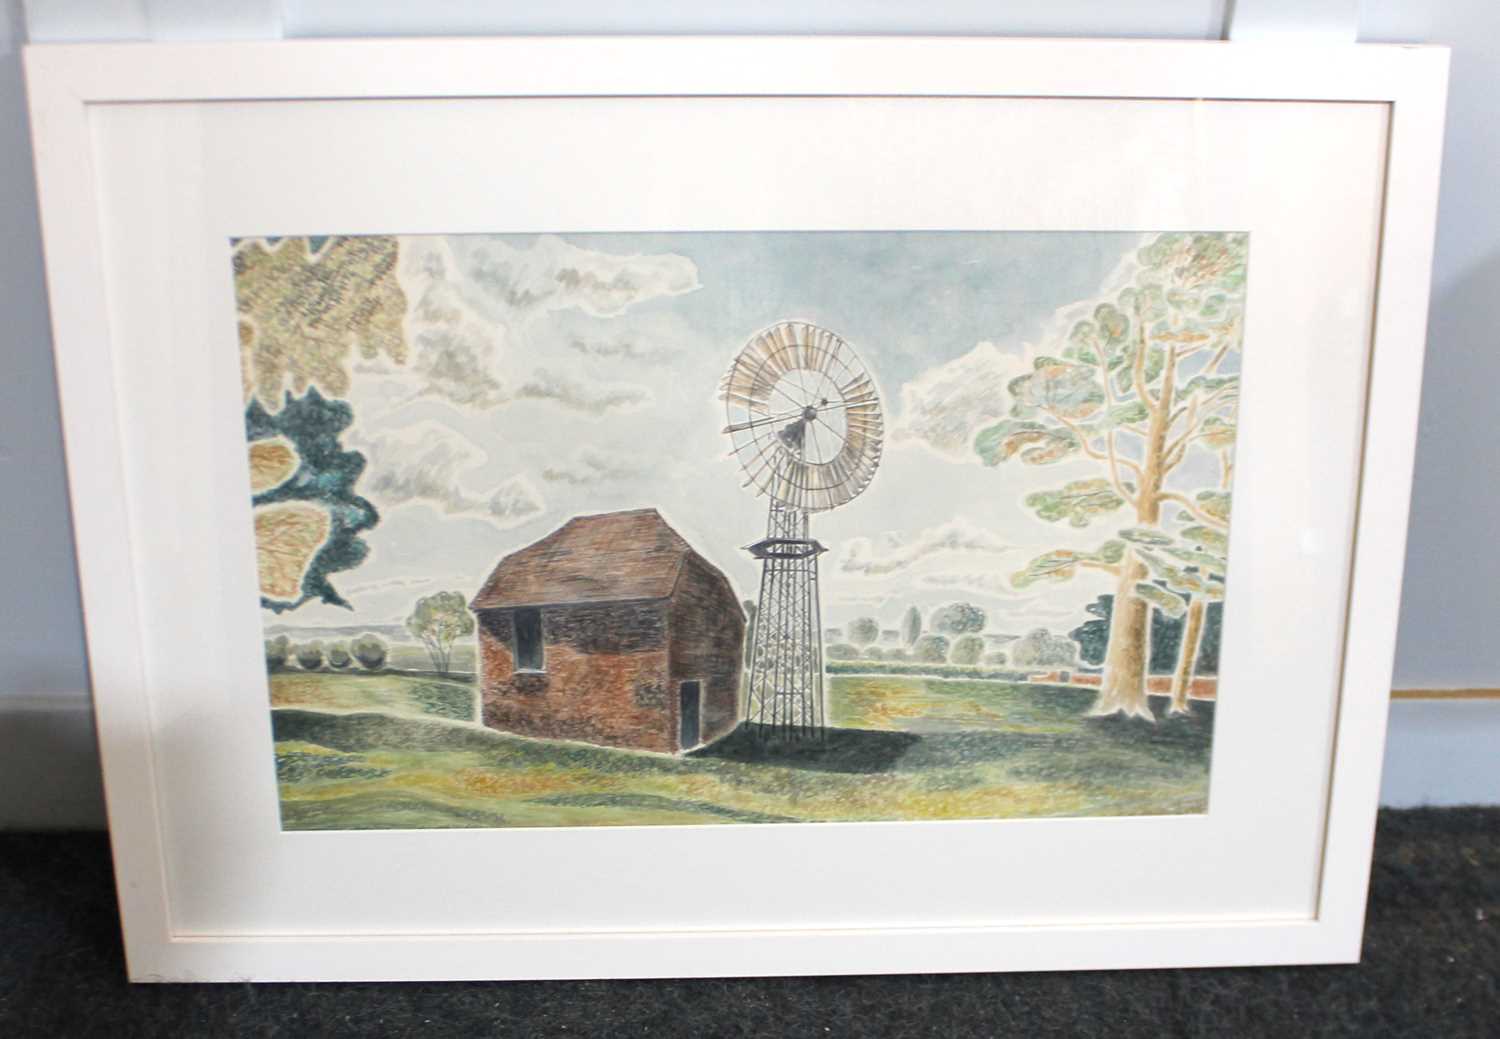 Roger Isaac, Wind Engine, Crux Easton, Hampshire, watercolour, 34cm by 54cm